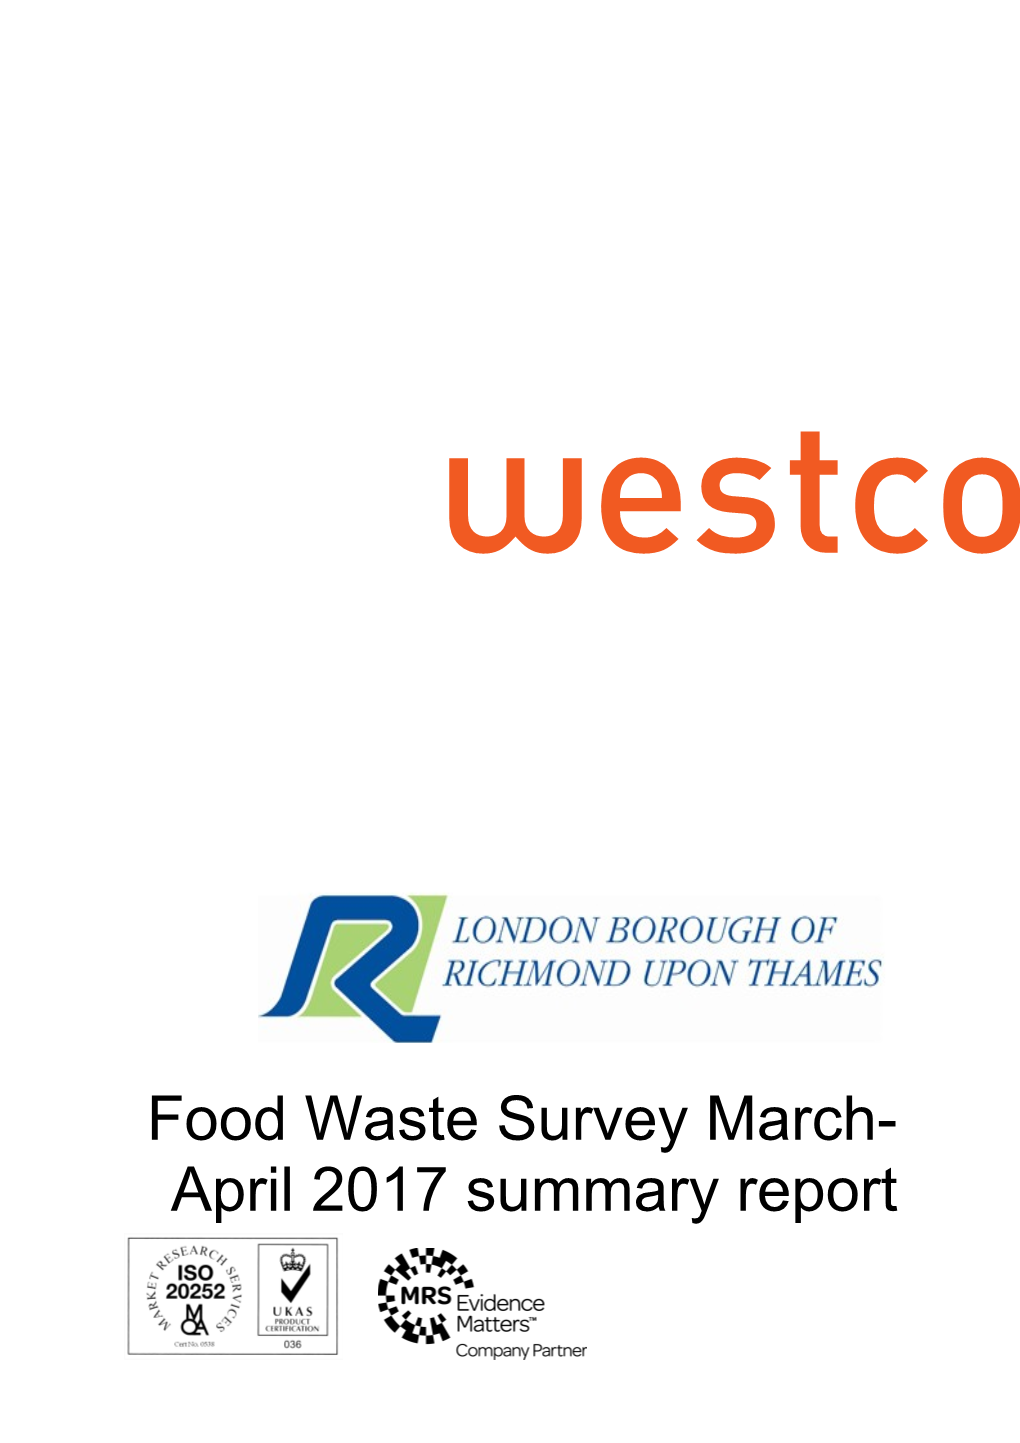 Food Waste Survey March-April 2017 Summary Report